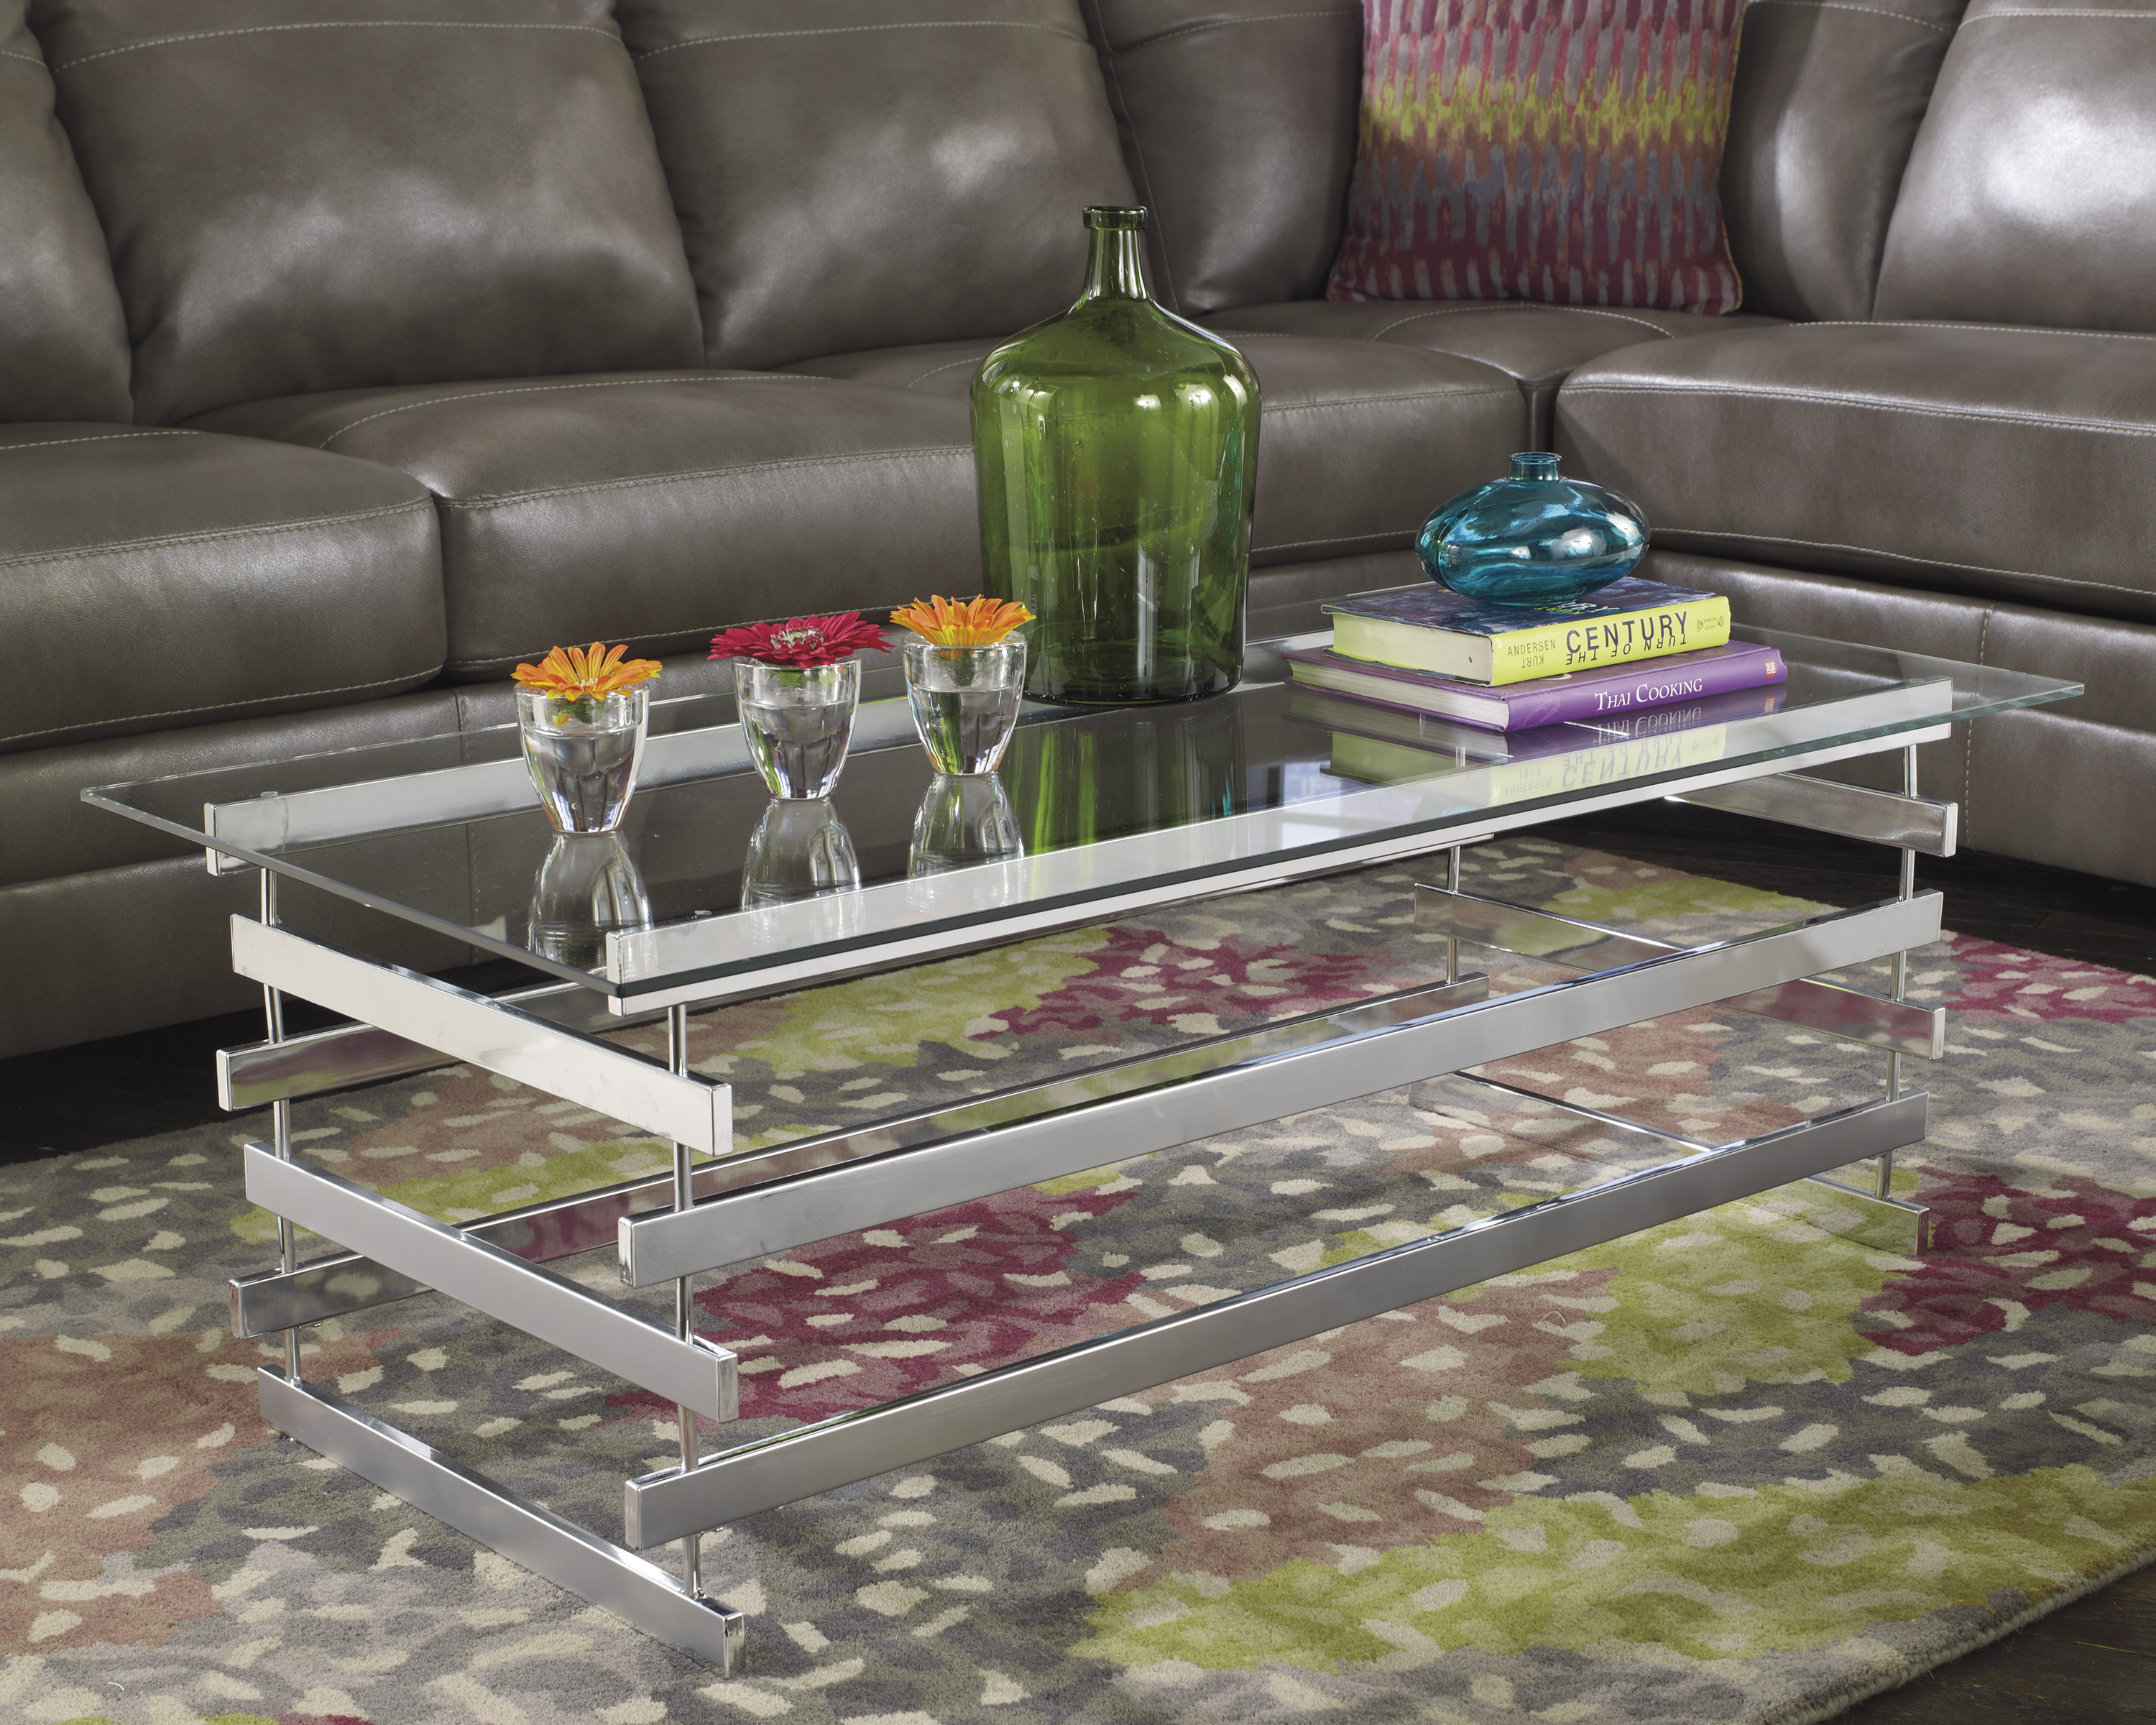 Frandelli Coffee Table
Matching End Table also available